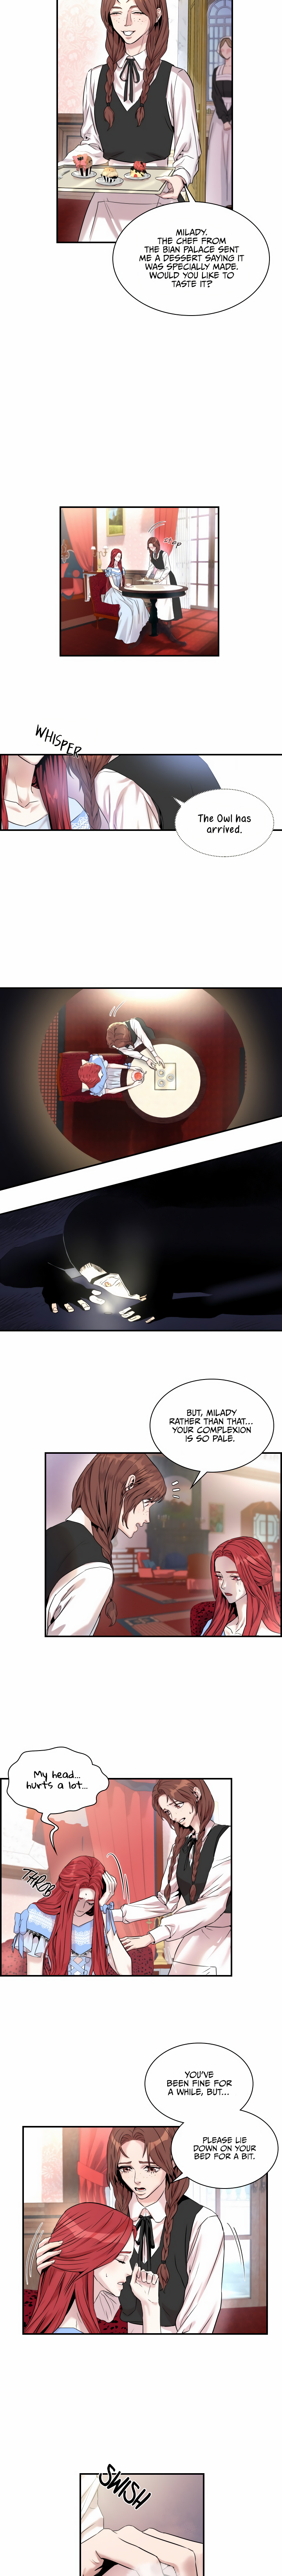 Aideen - Page 2